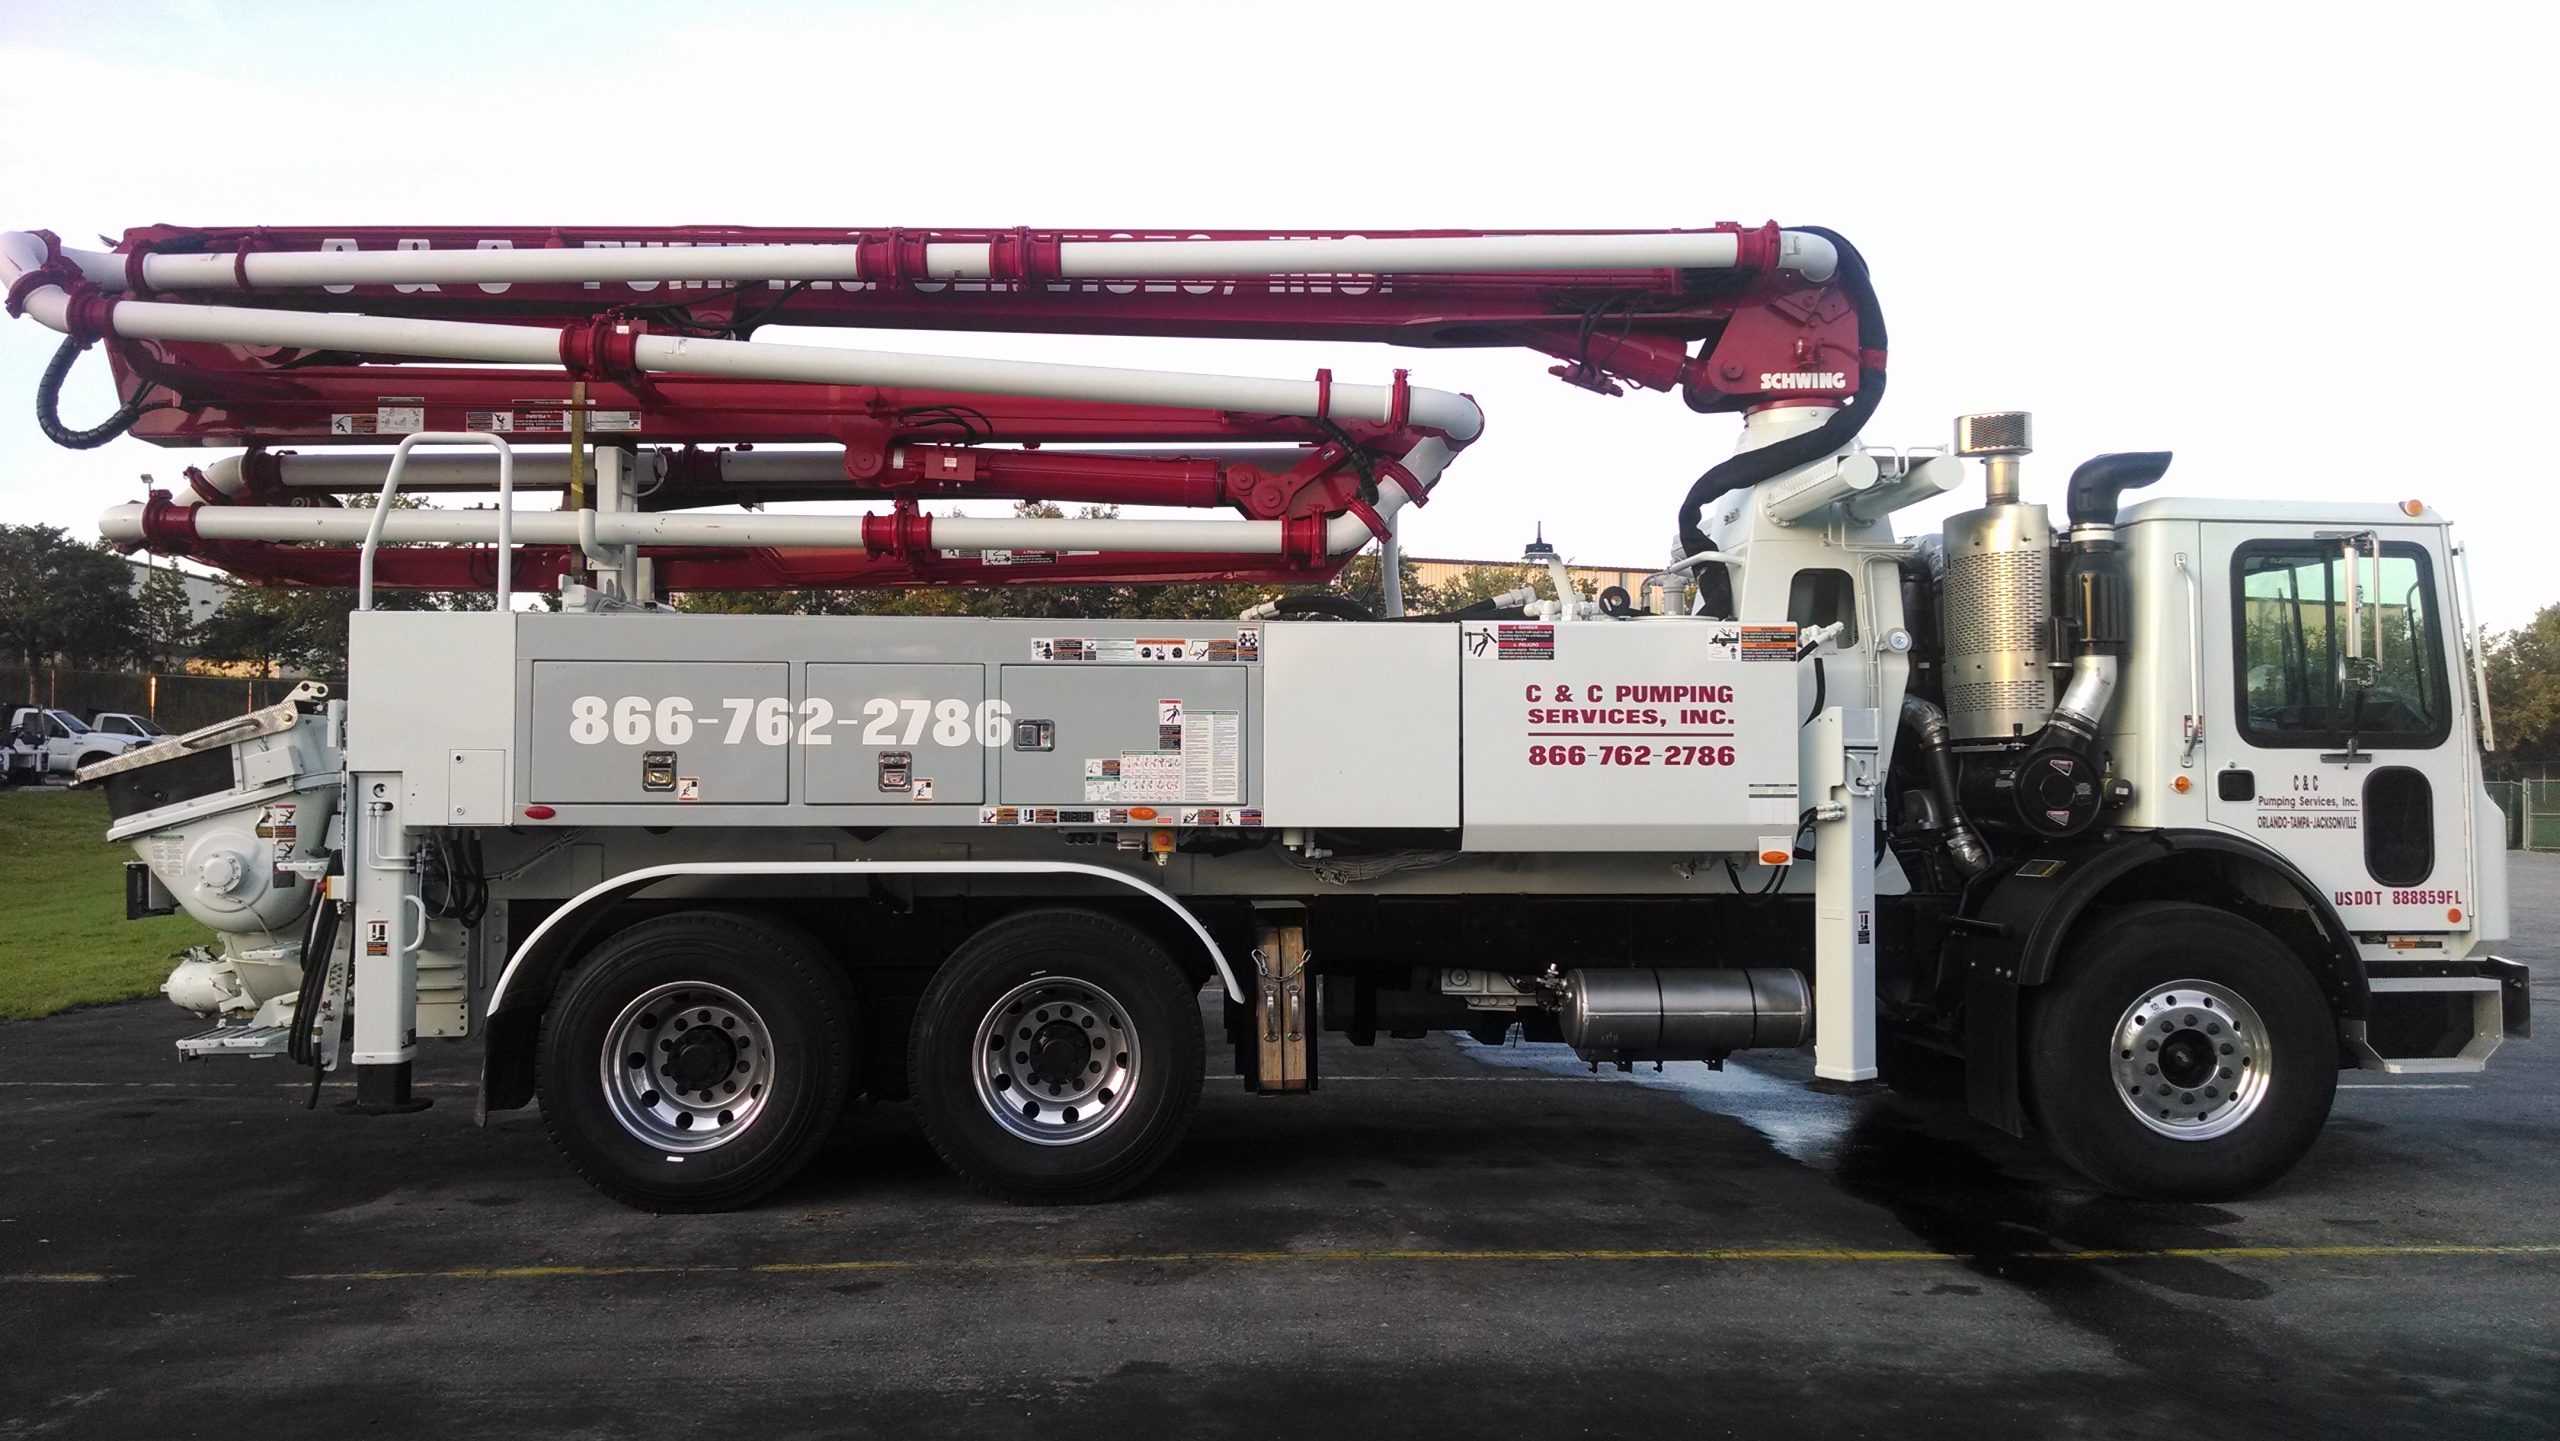 28 Meter concrete boom pump, provided by C&C Pumping Services Inc. 